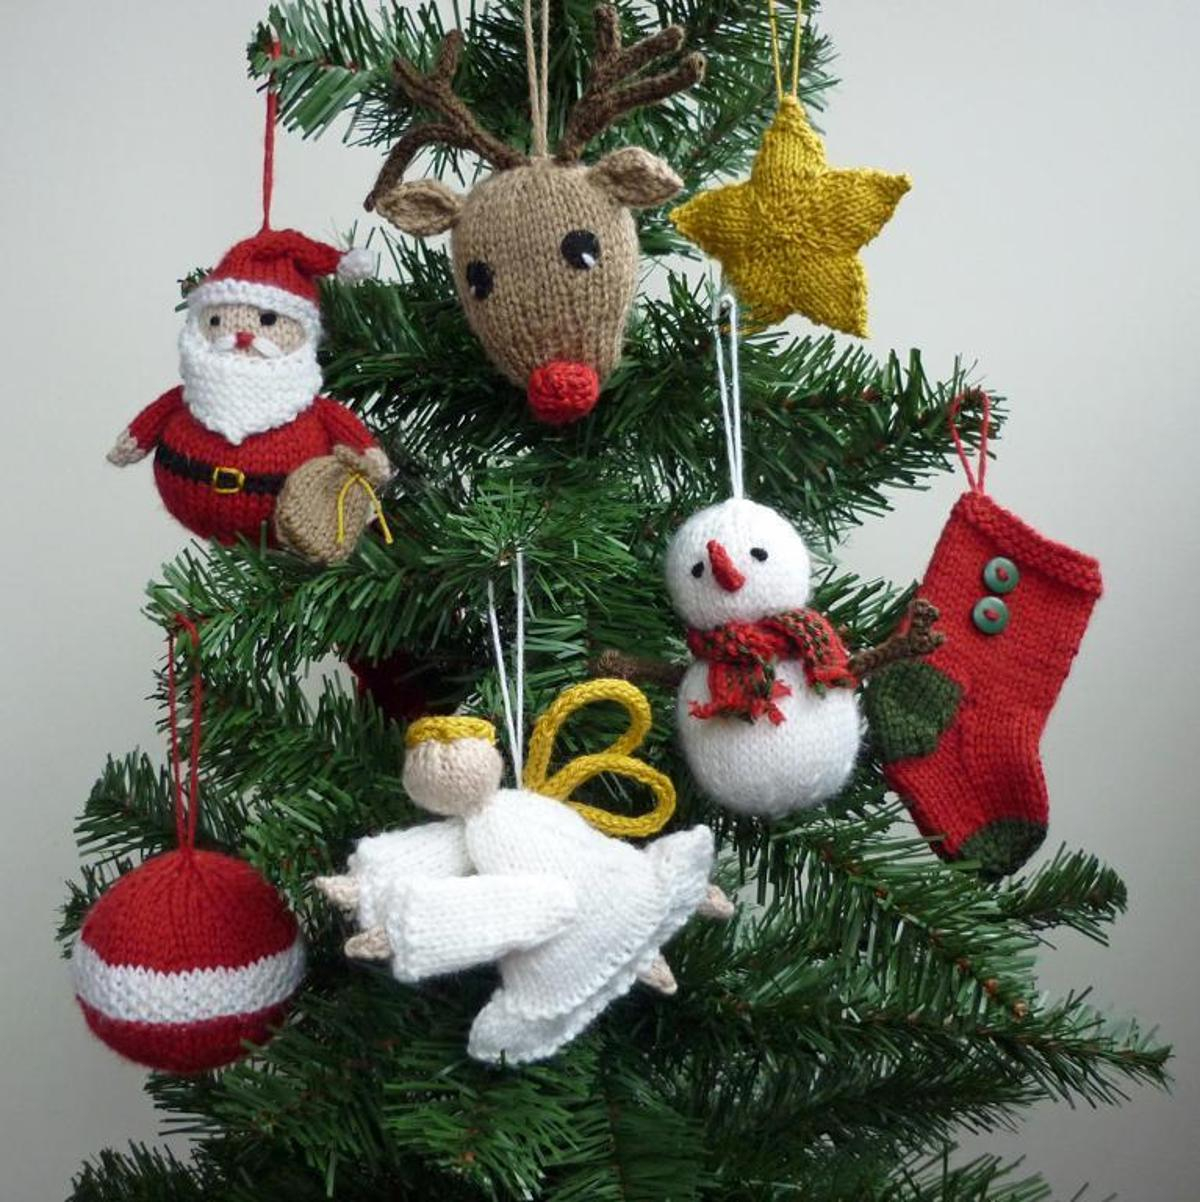 Knit Christmas Ornament Patterns Christmas Knitting Patterns For Holiday Feelings